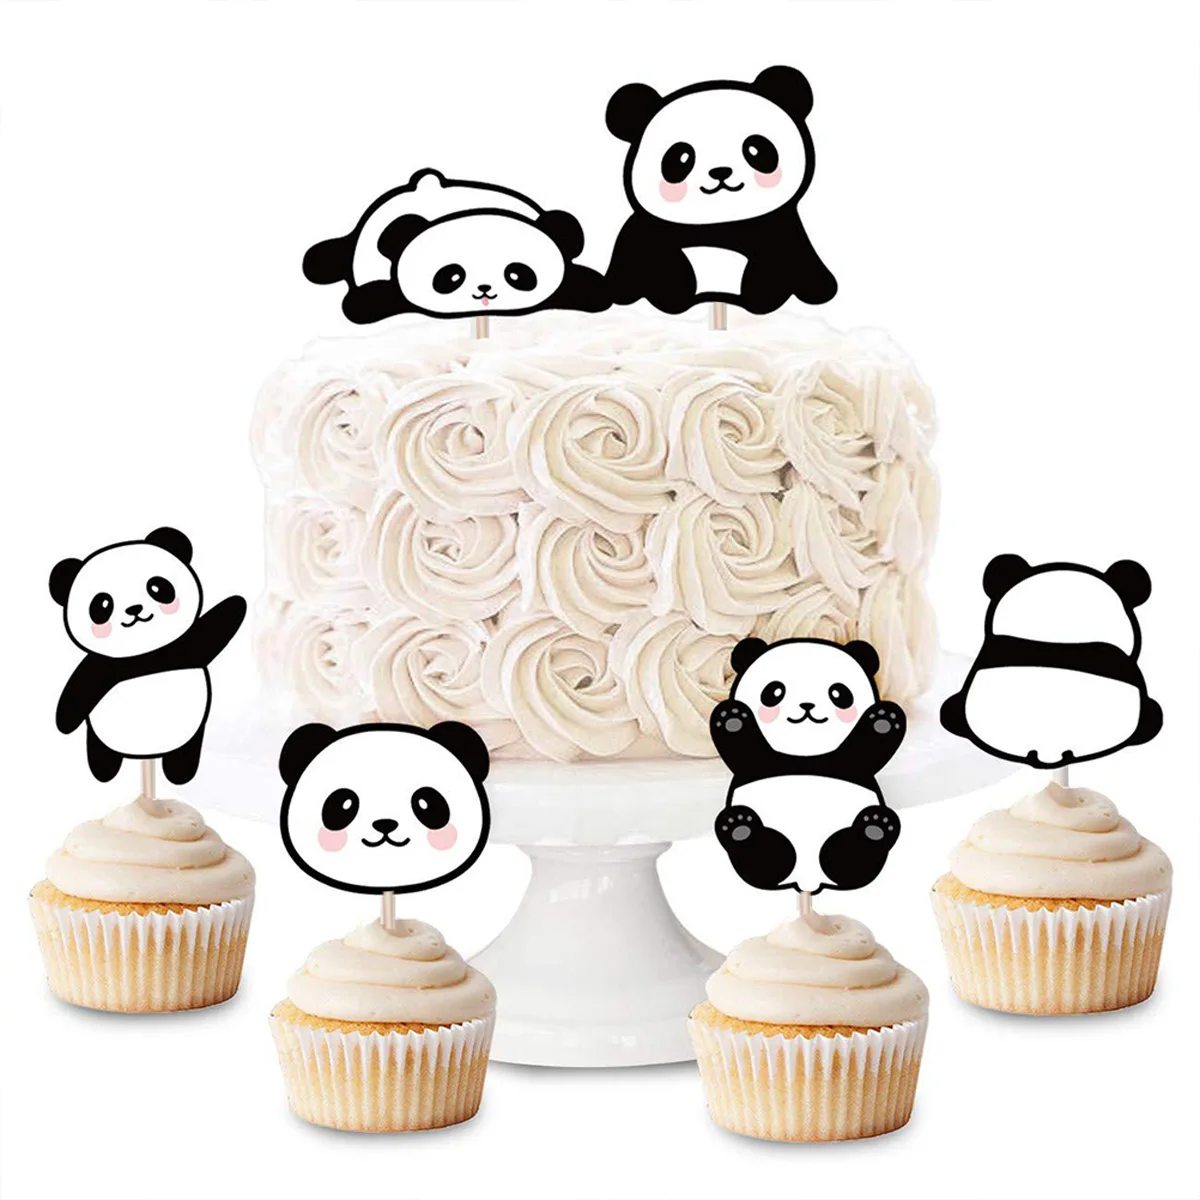 

48pcs Cute Panda Shaped Cake Topper Paper Cupcake Toppers Wedding Kids Birthday Baby Shower Party Favors Fruit Picks Toothpick